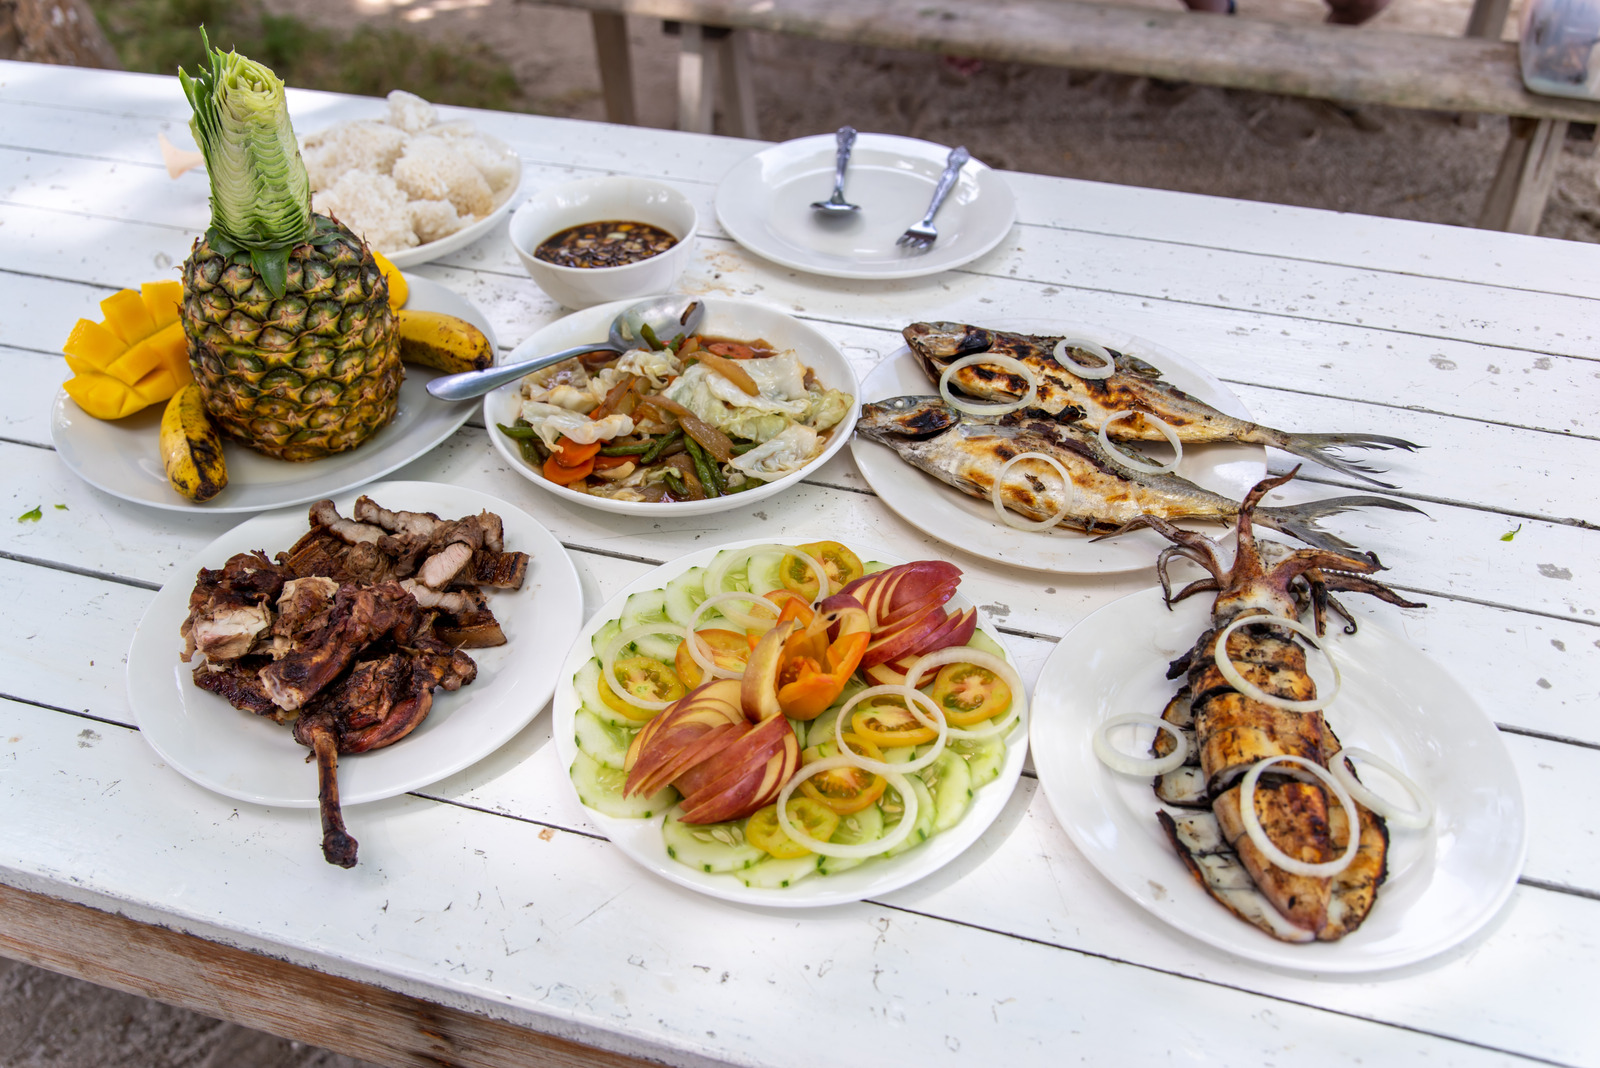 Filipino Food at its Finest on the South Coast